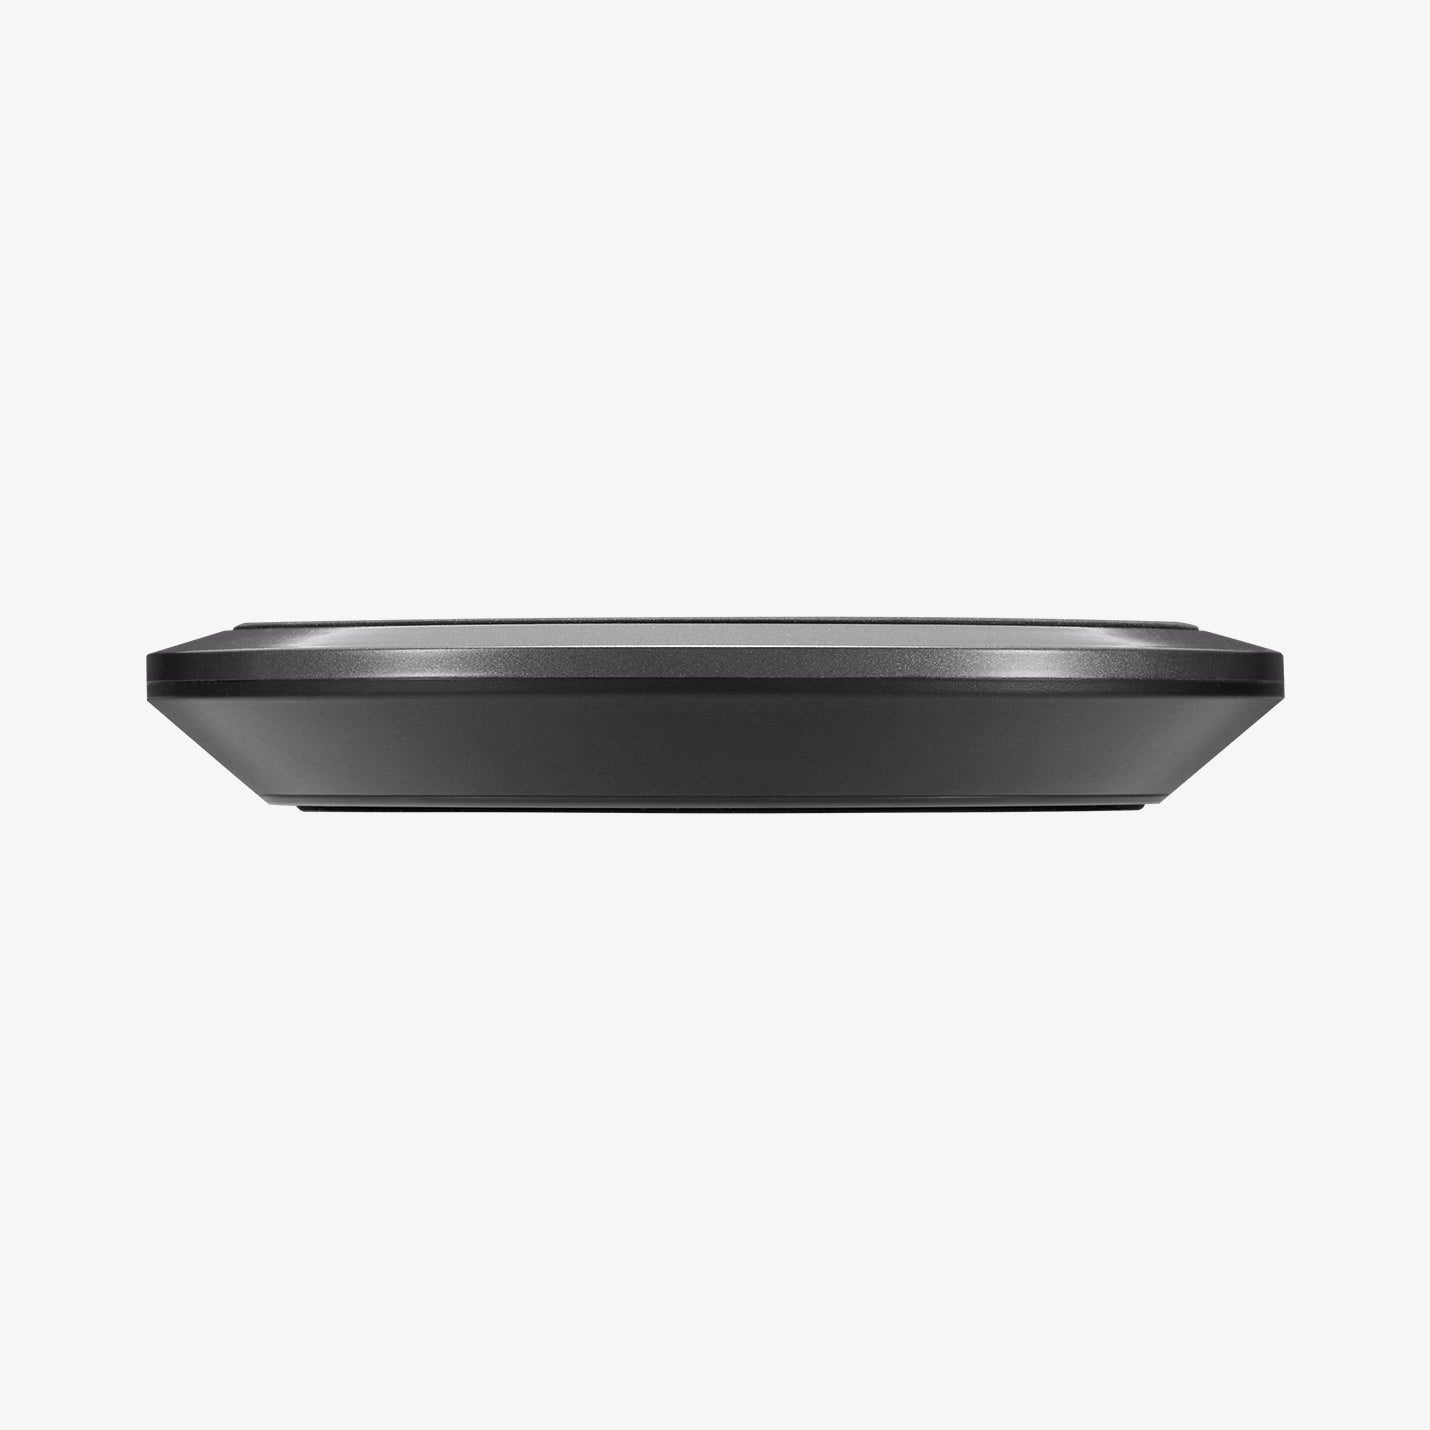 000CH23122 - Essential® Leather Designed 10W Wireless Charger F308W in black showing the front